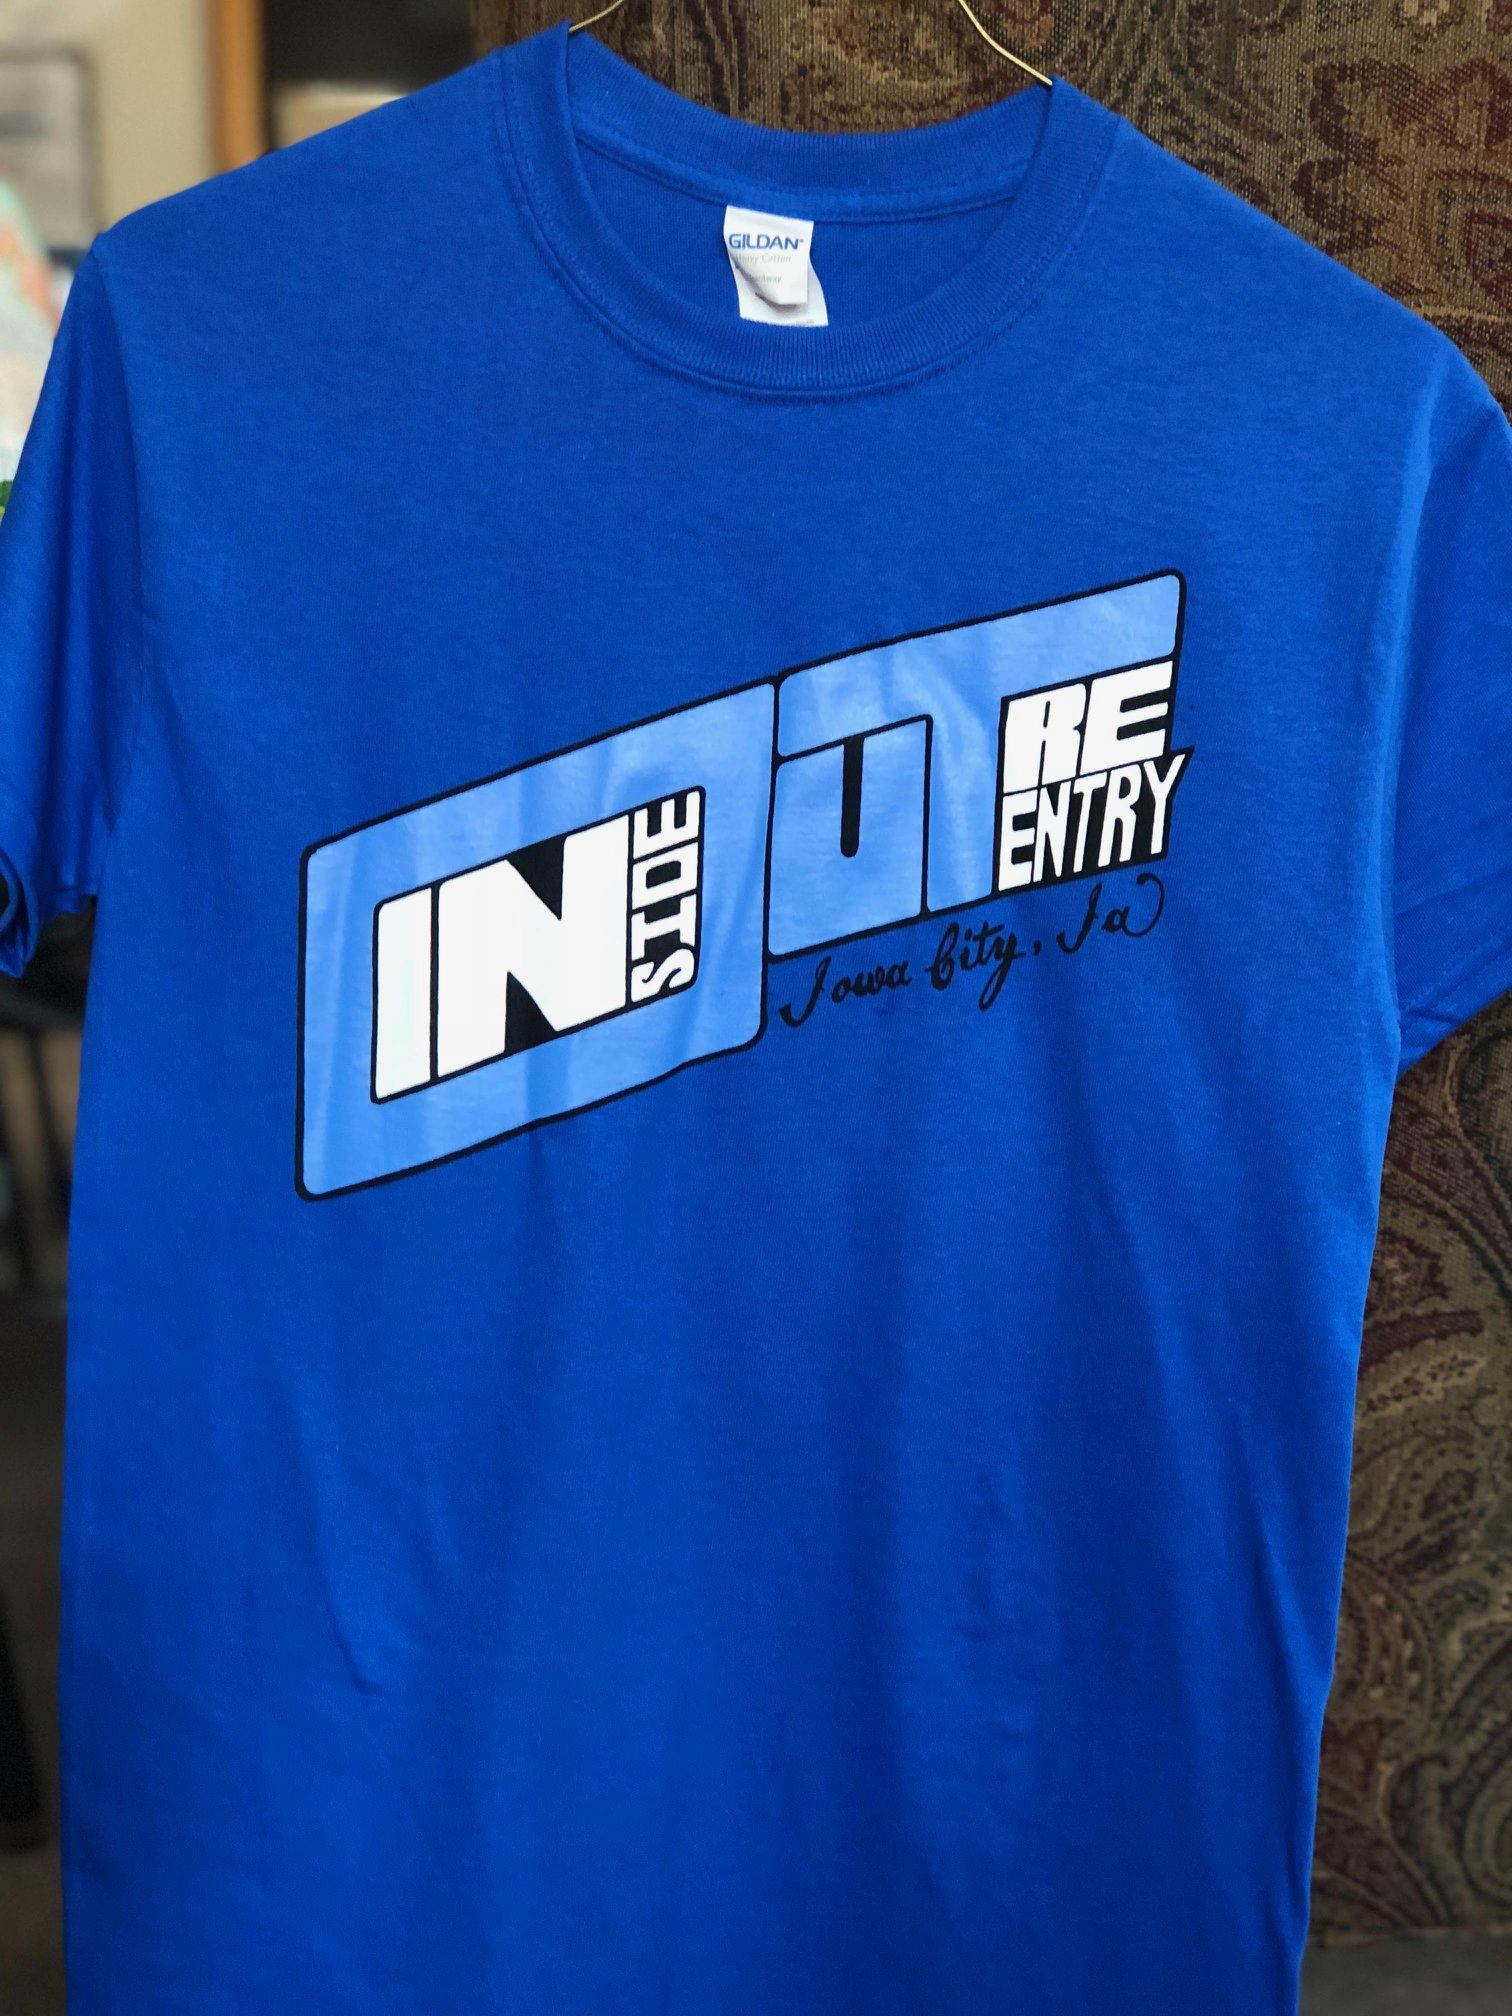 Inside Out Reentry T-shirt